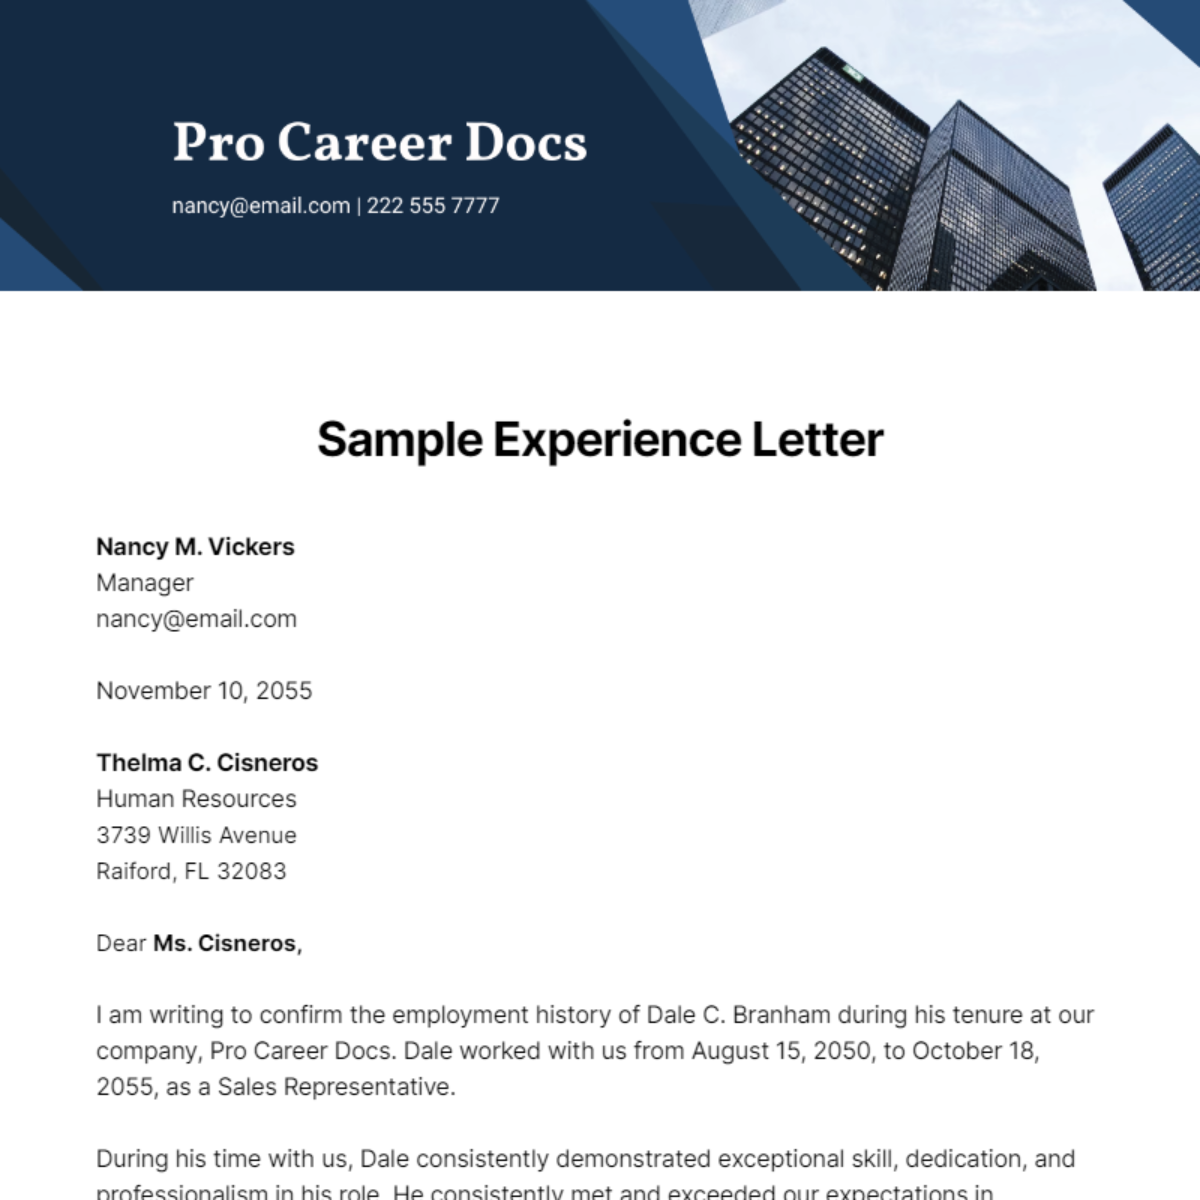 Sample Experience Letter   Template